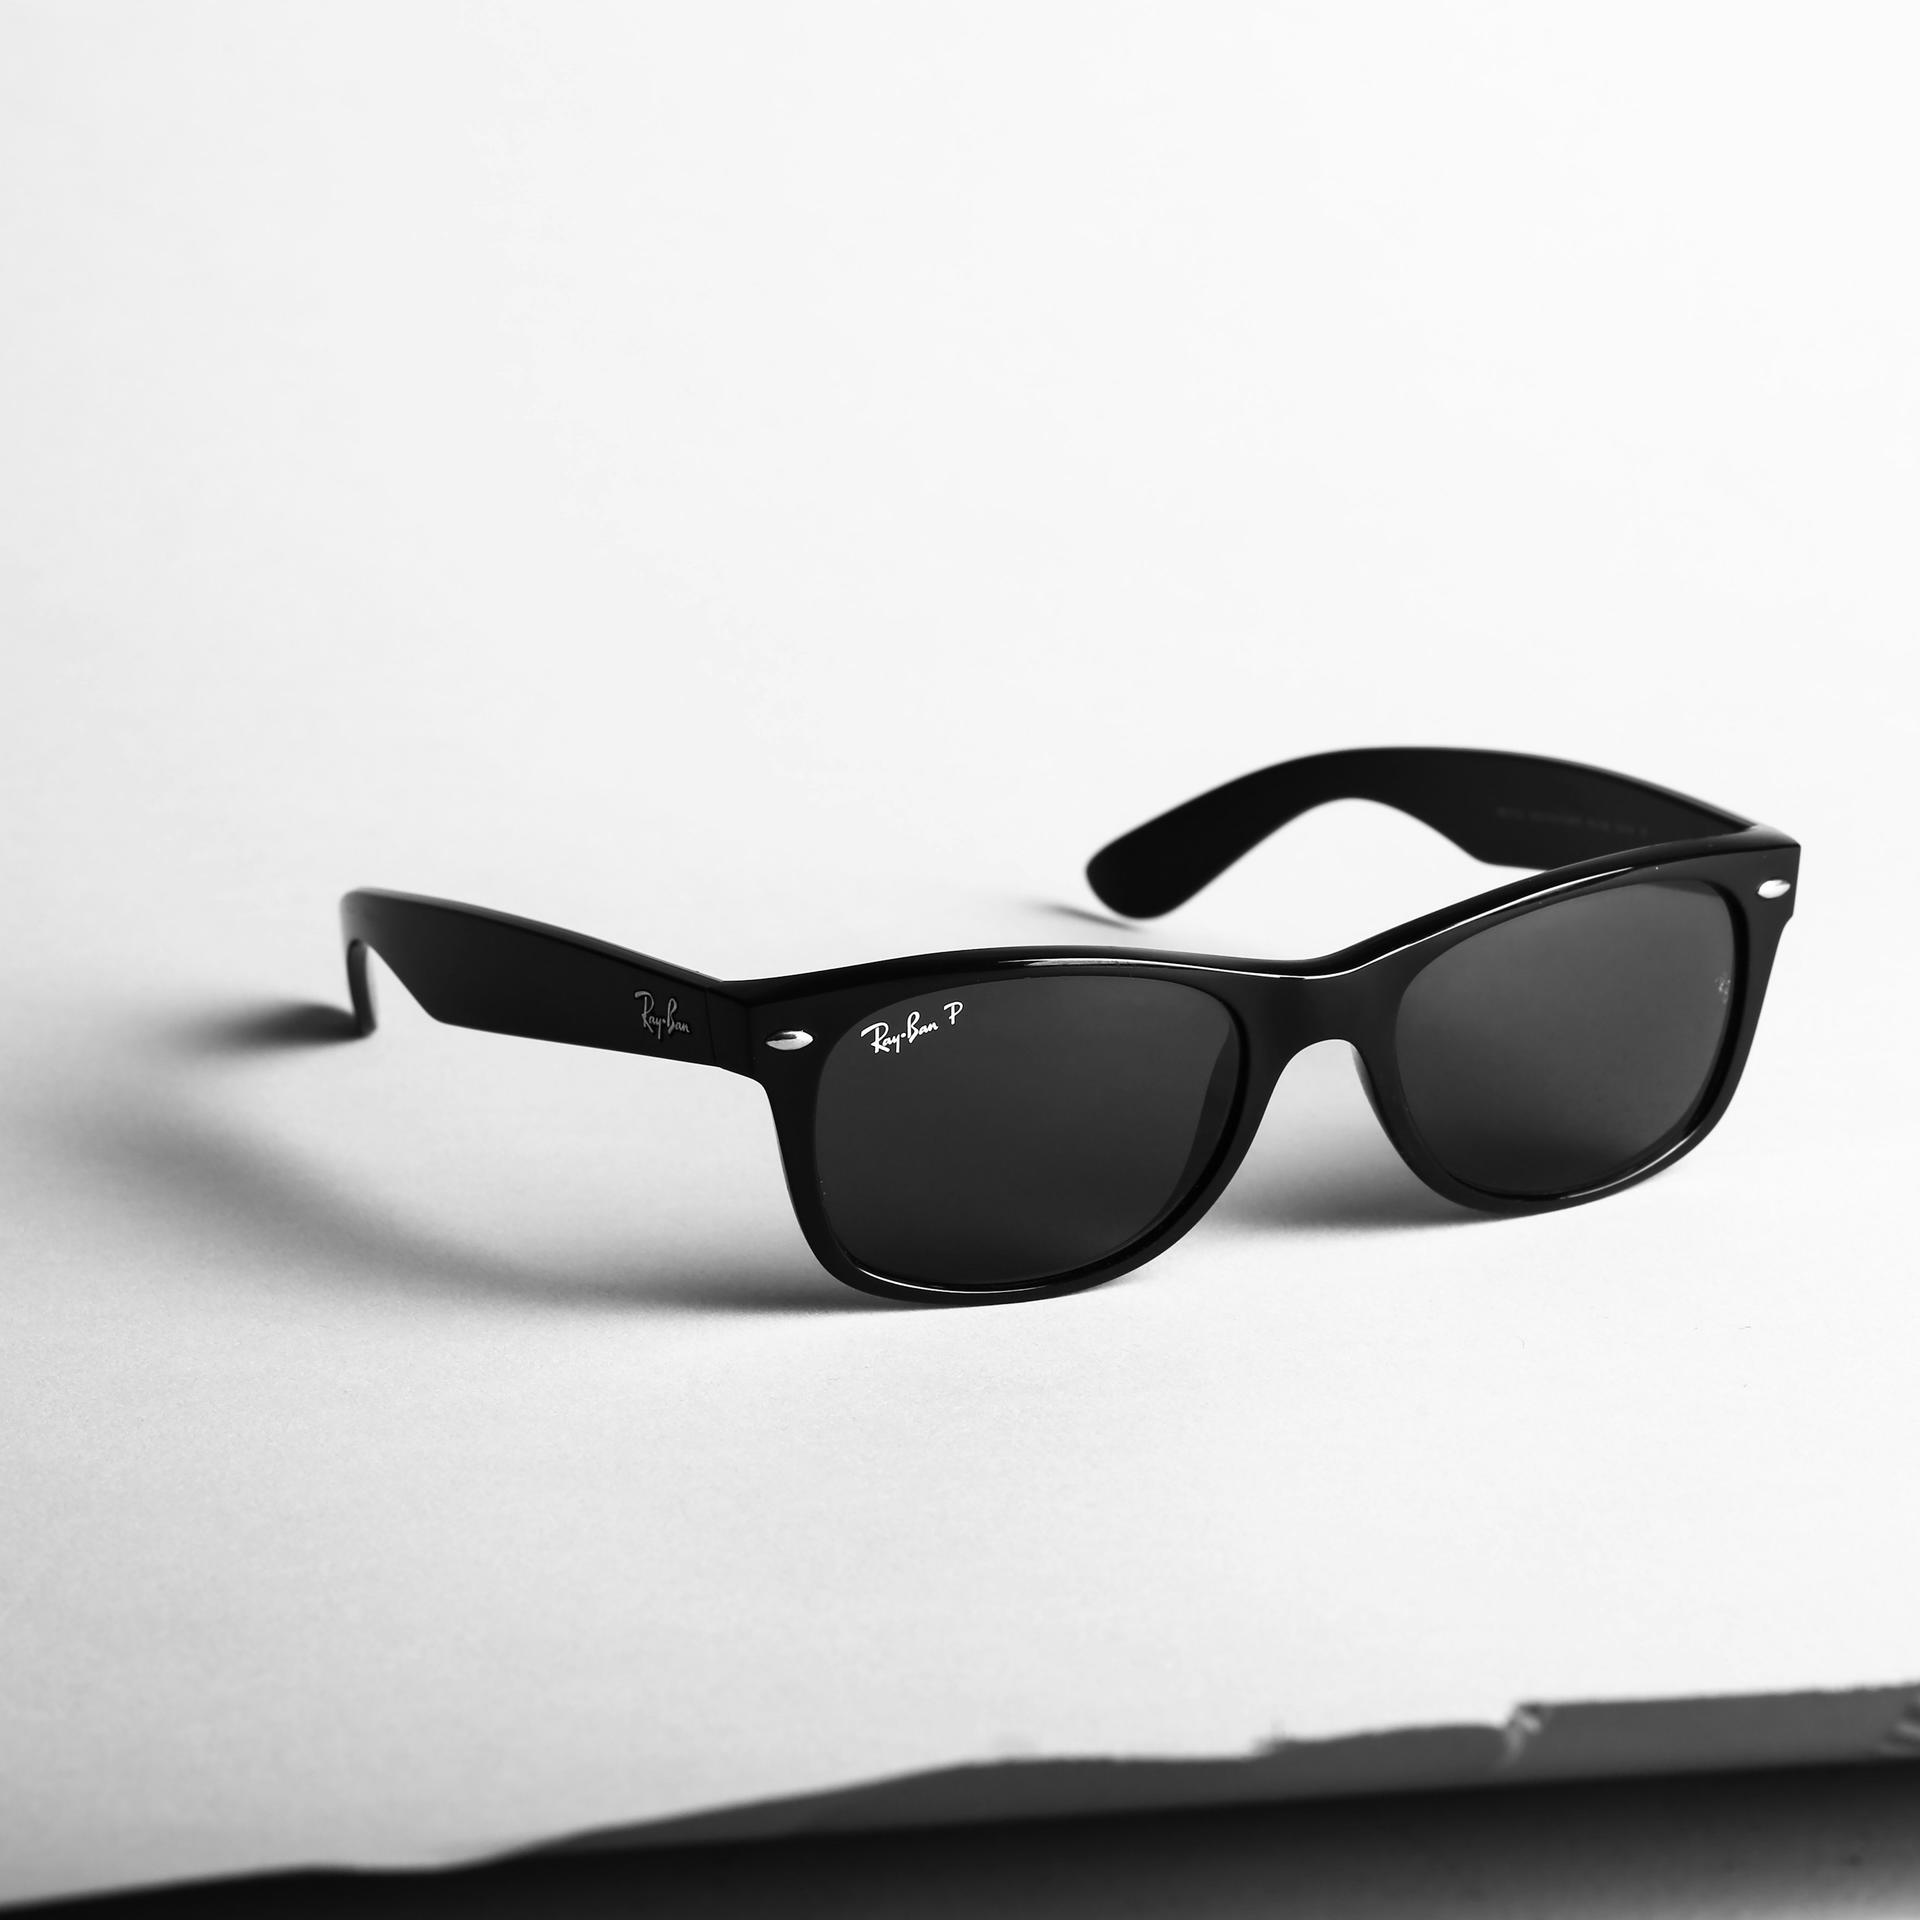 Ray-Ban Classic Black Wayfarer Sunglasses - Timeless Cool in Every Glance